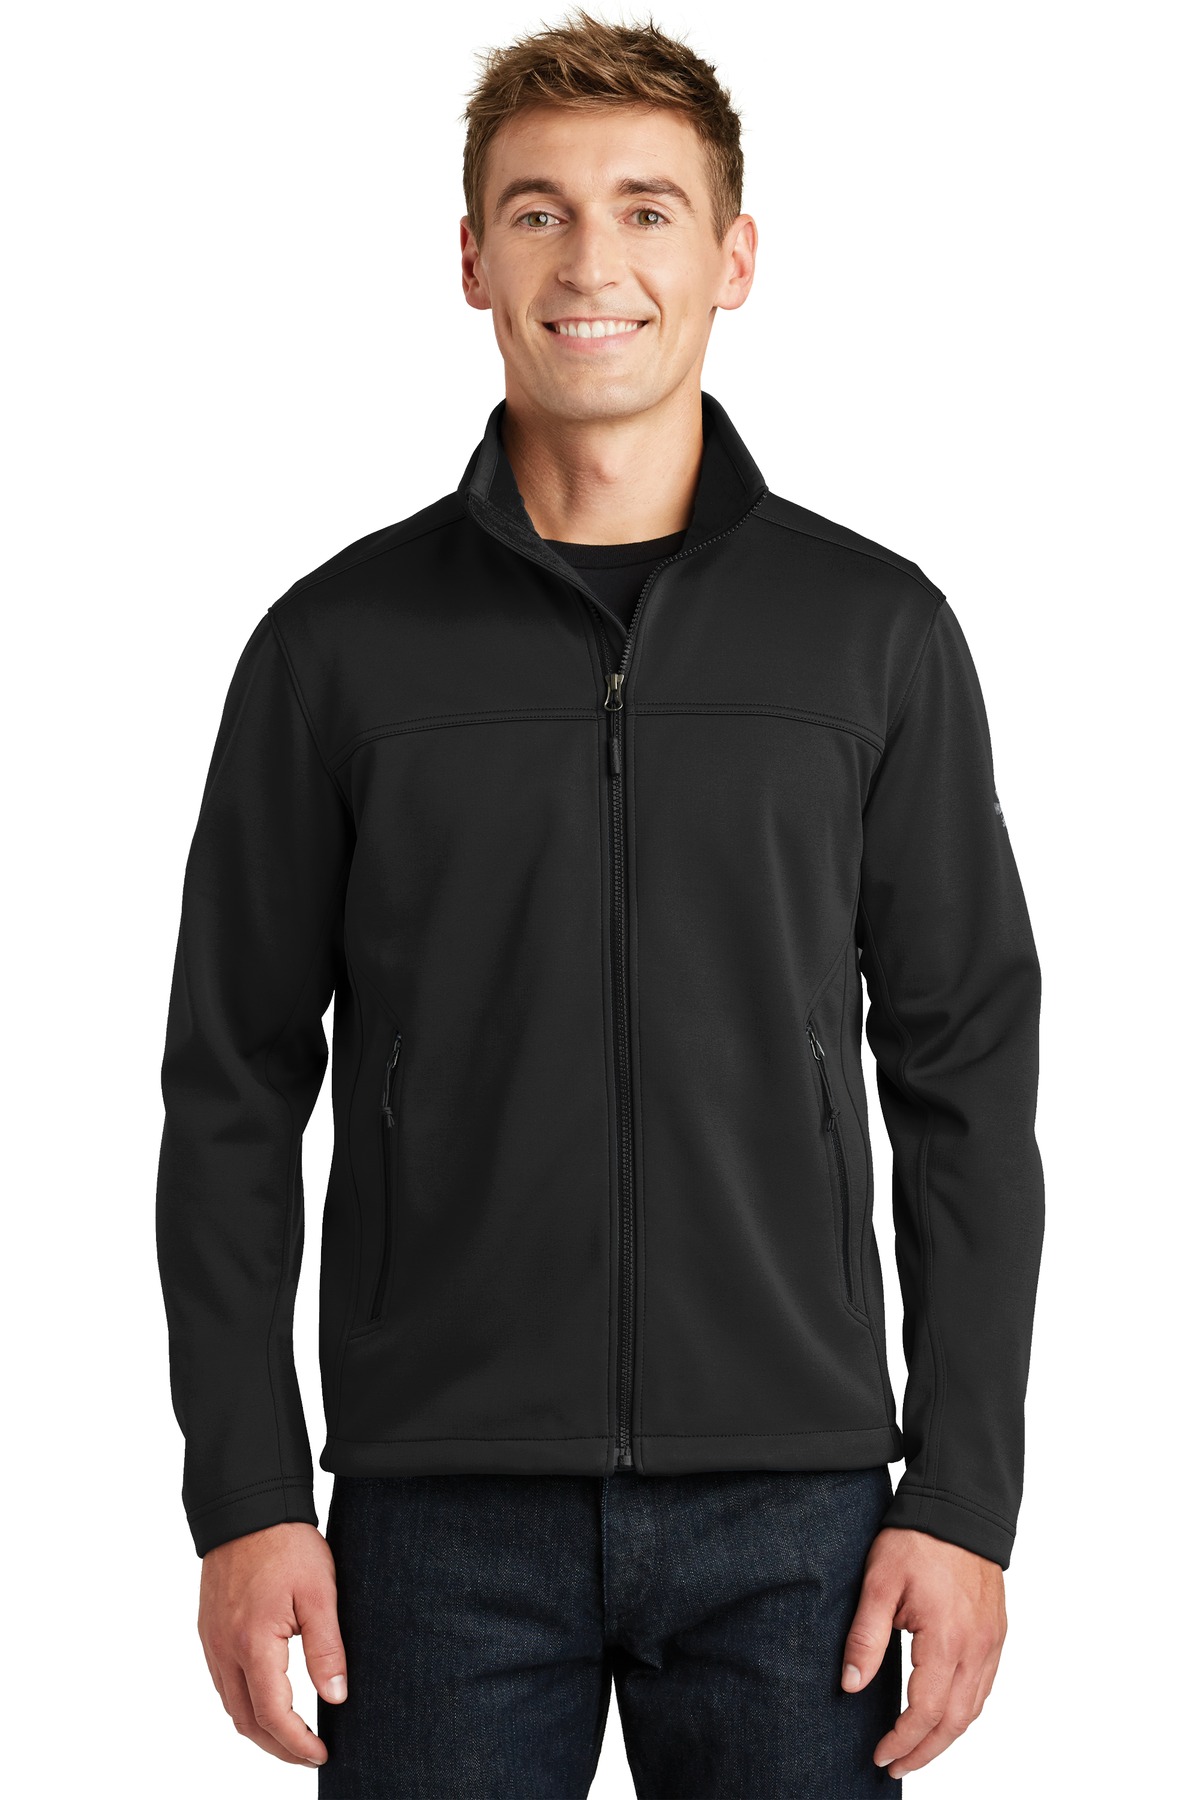 The North Face Outerwear for Corporate & Hospitality ® Ridgeline Soft Shell Jacket.-The North Face